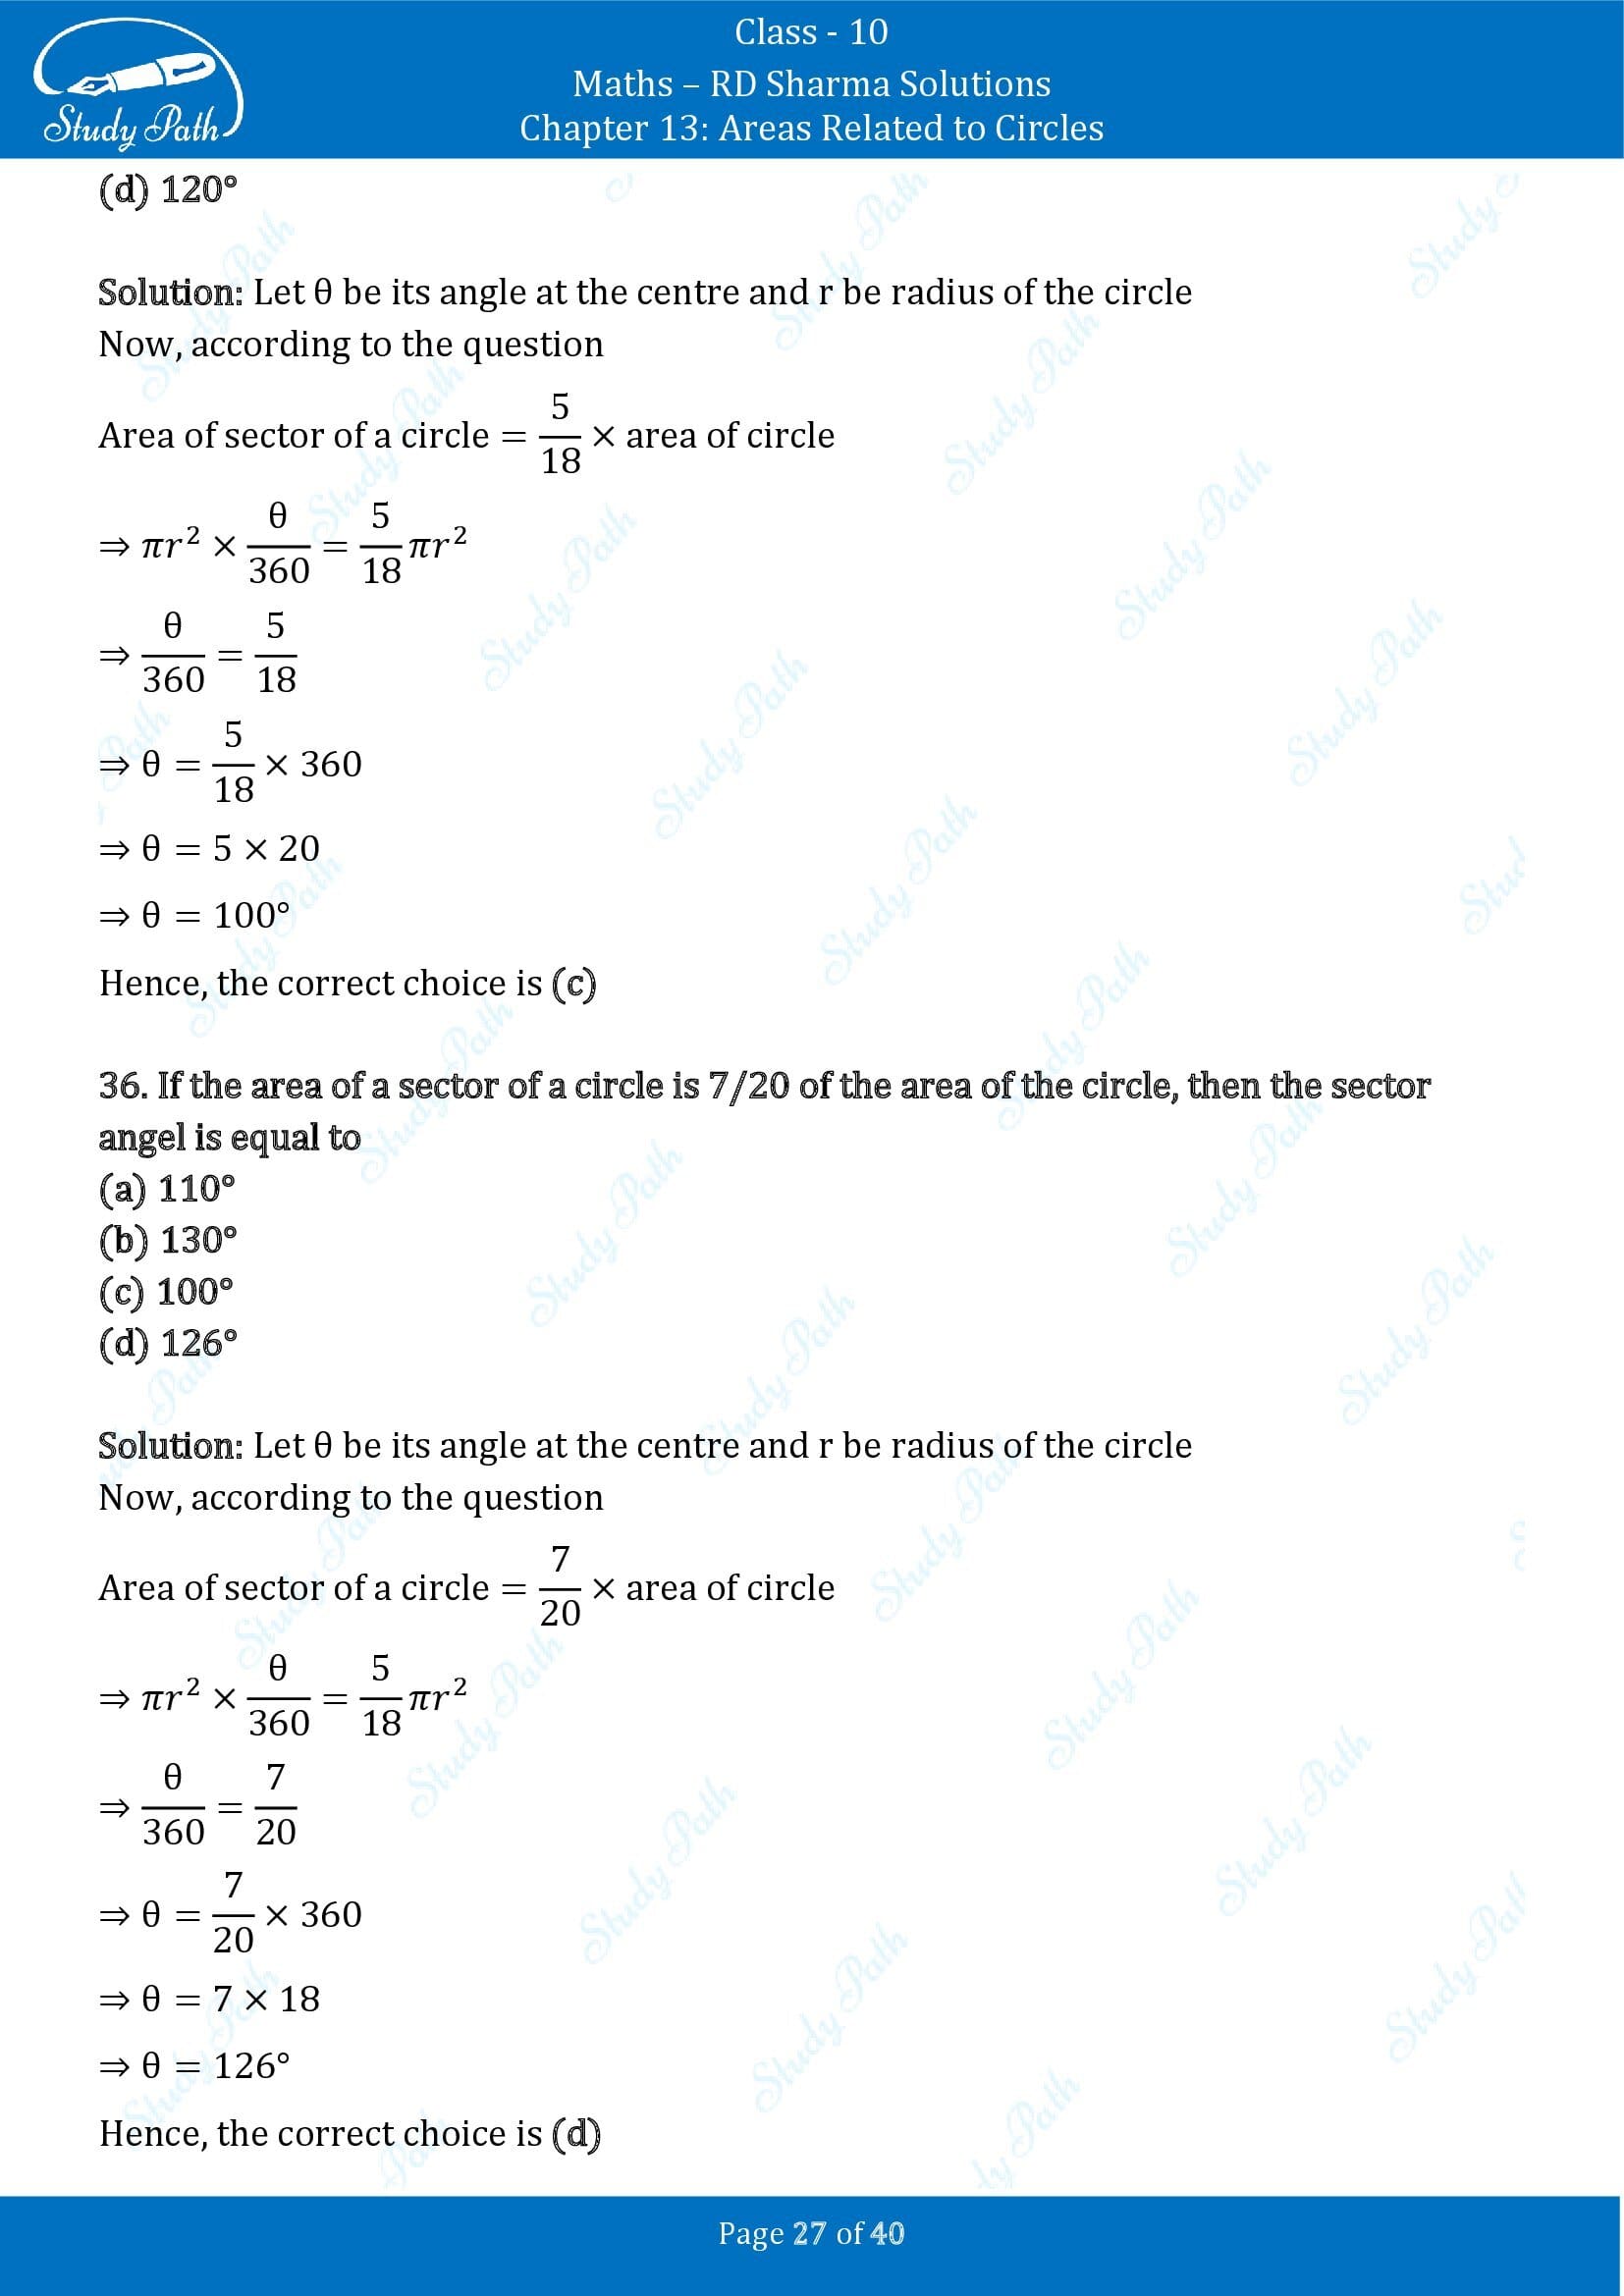 RD Sharma Solutions Class 10 Chapter 13 Areas Related to Circles Multiple Choice Question MCQs 00027